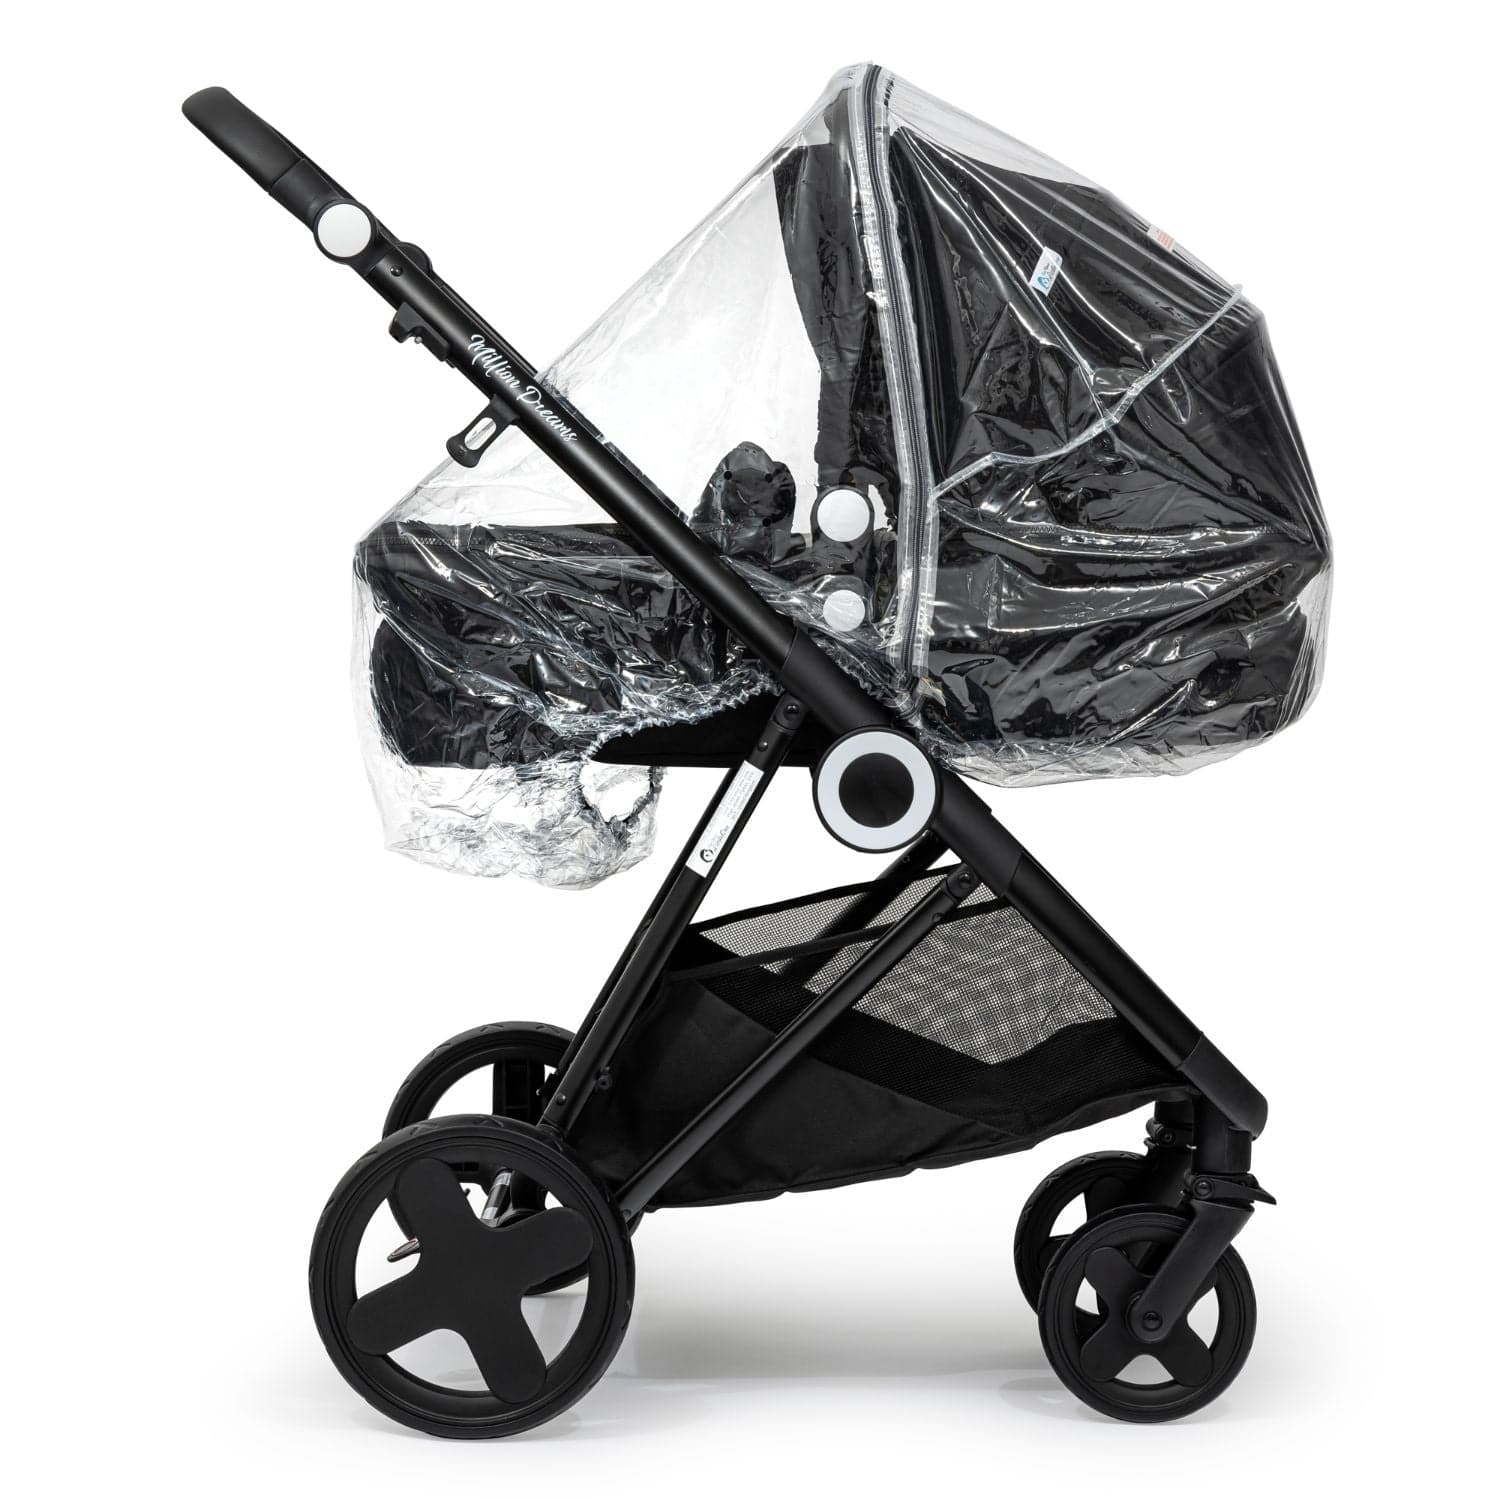 Carrycot Raincover Compatible With Babybus - Fits All Models - For Your Little One